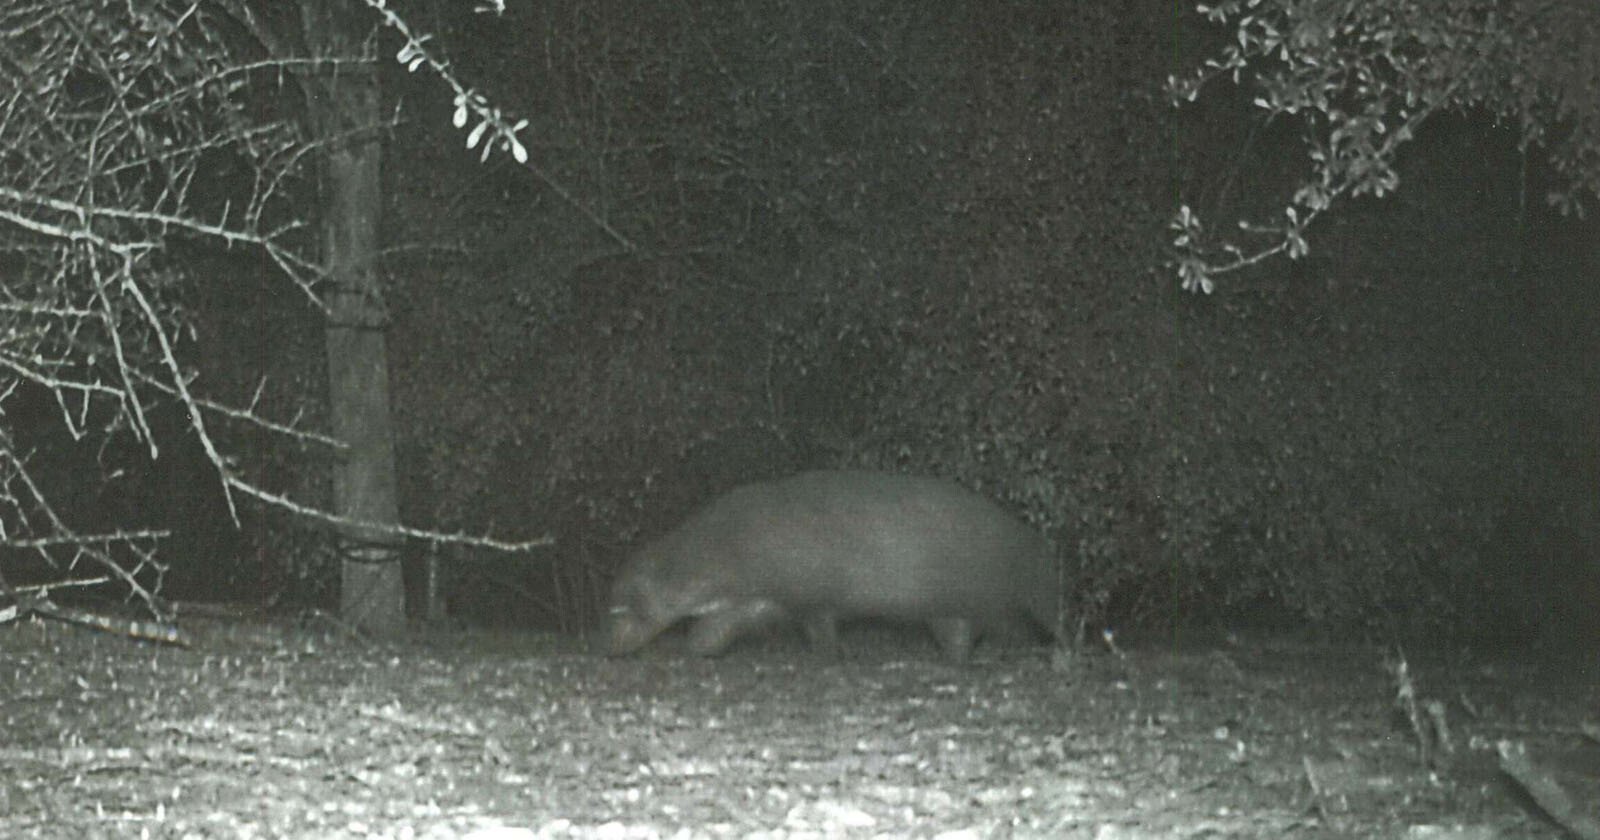  mystery creature caught camera puzzles state park officials 